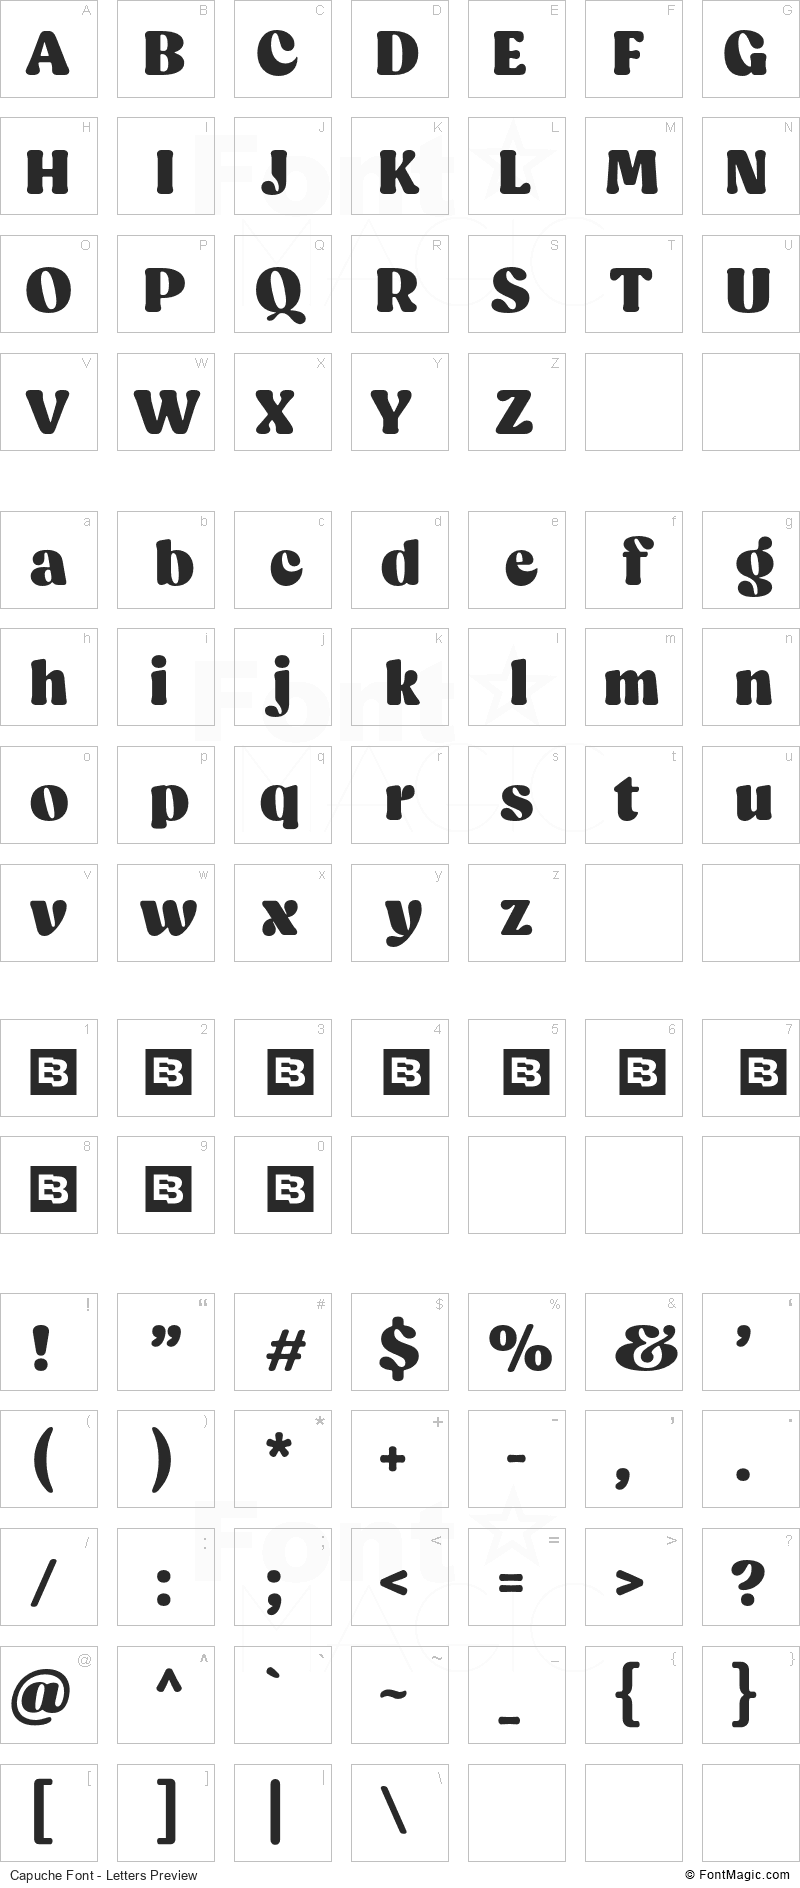 Capuche Font - All Latters Preview Chart